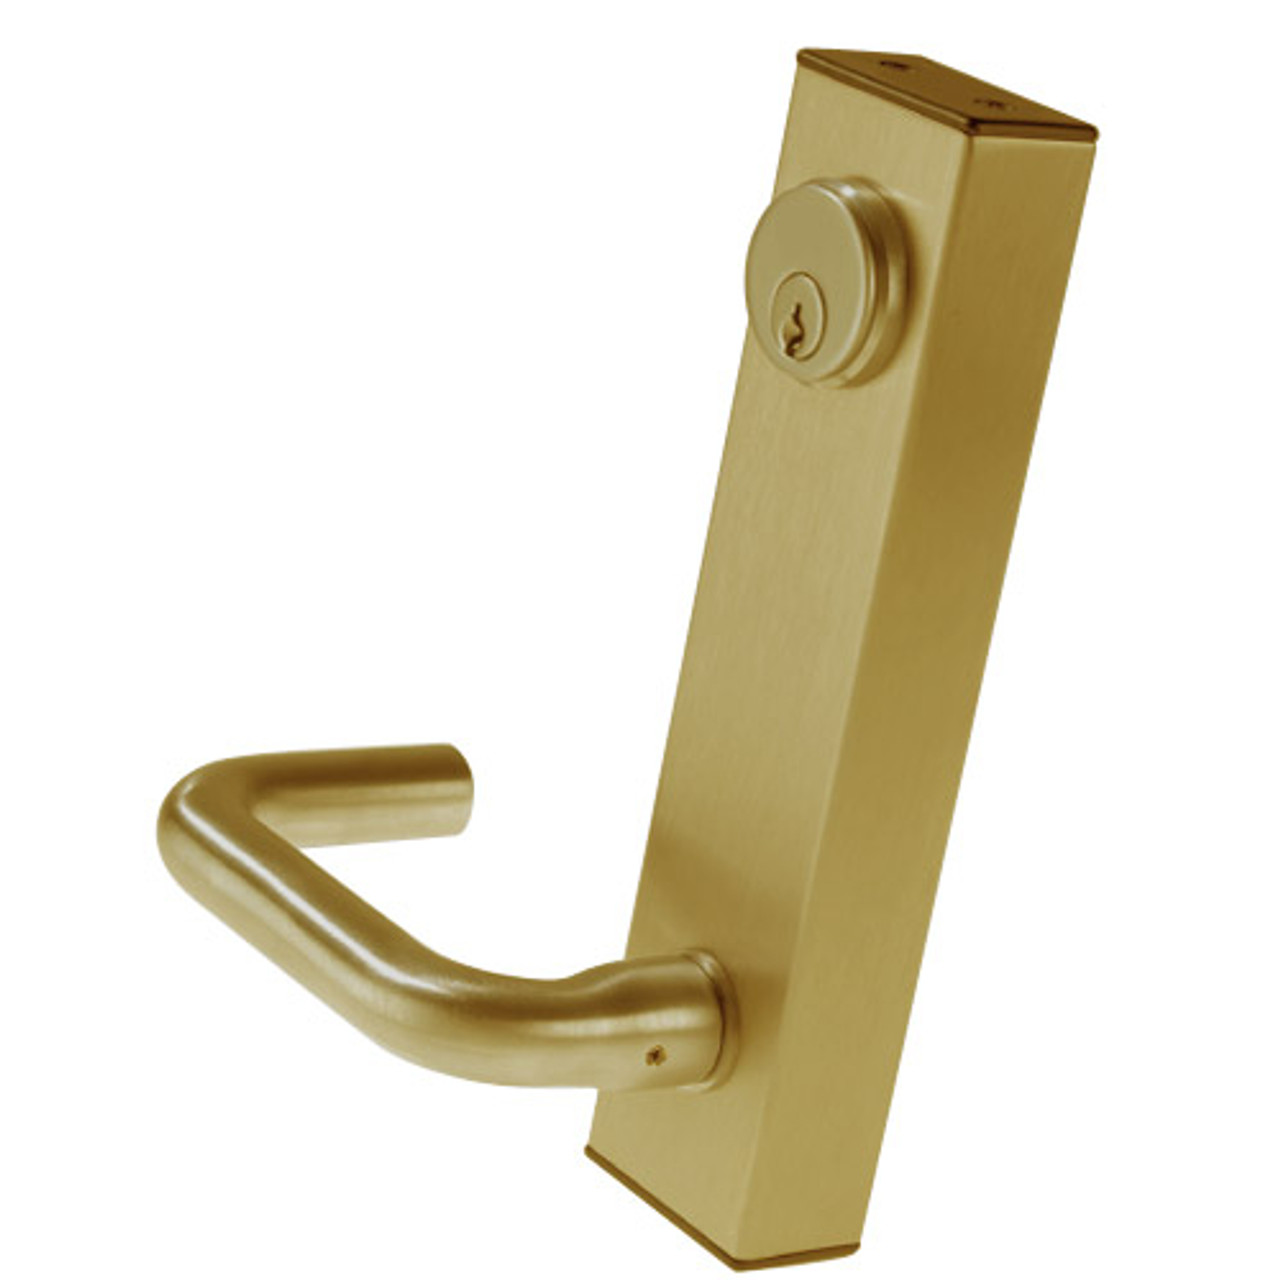 3080-02-0-96-US4 Adams Rite Standard Entry Trim with Round Lever in Satin Brass Finish